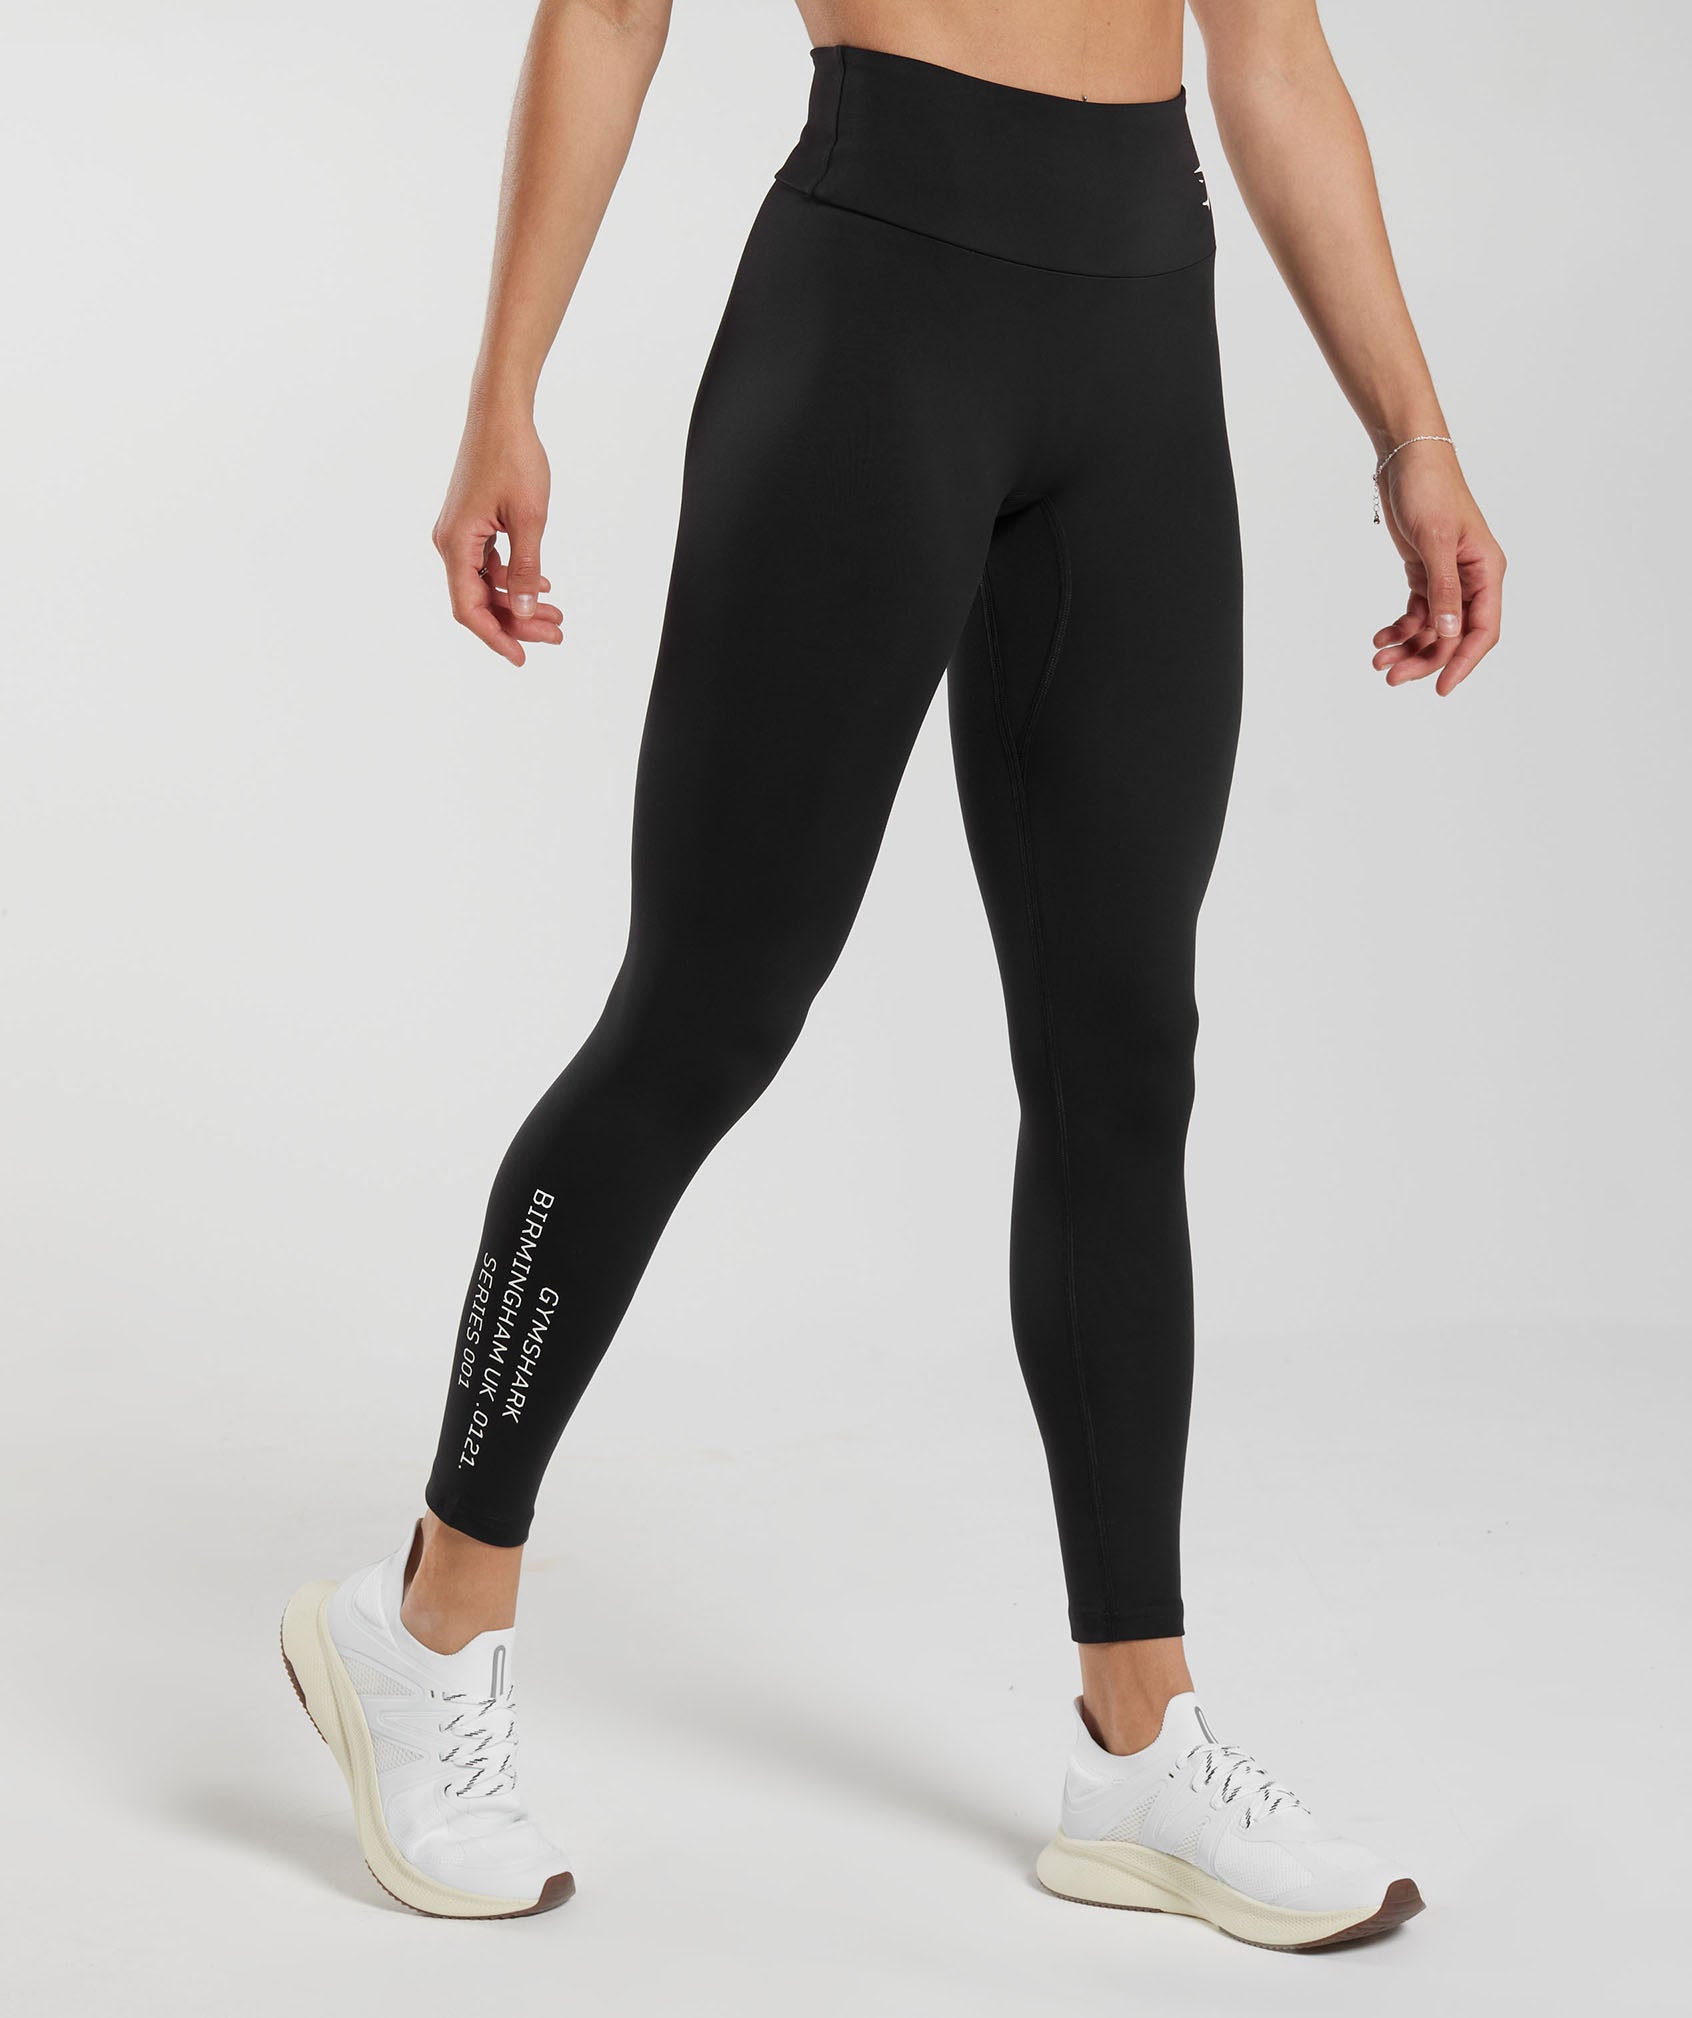 Gymshark Activated Graphic Leggings - Black